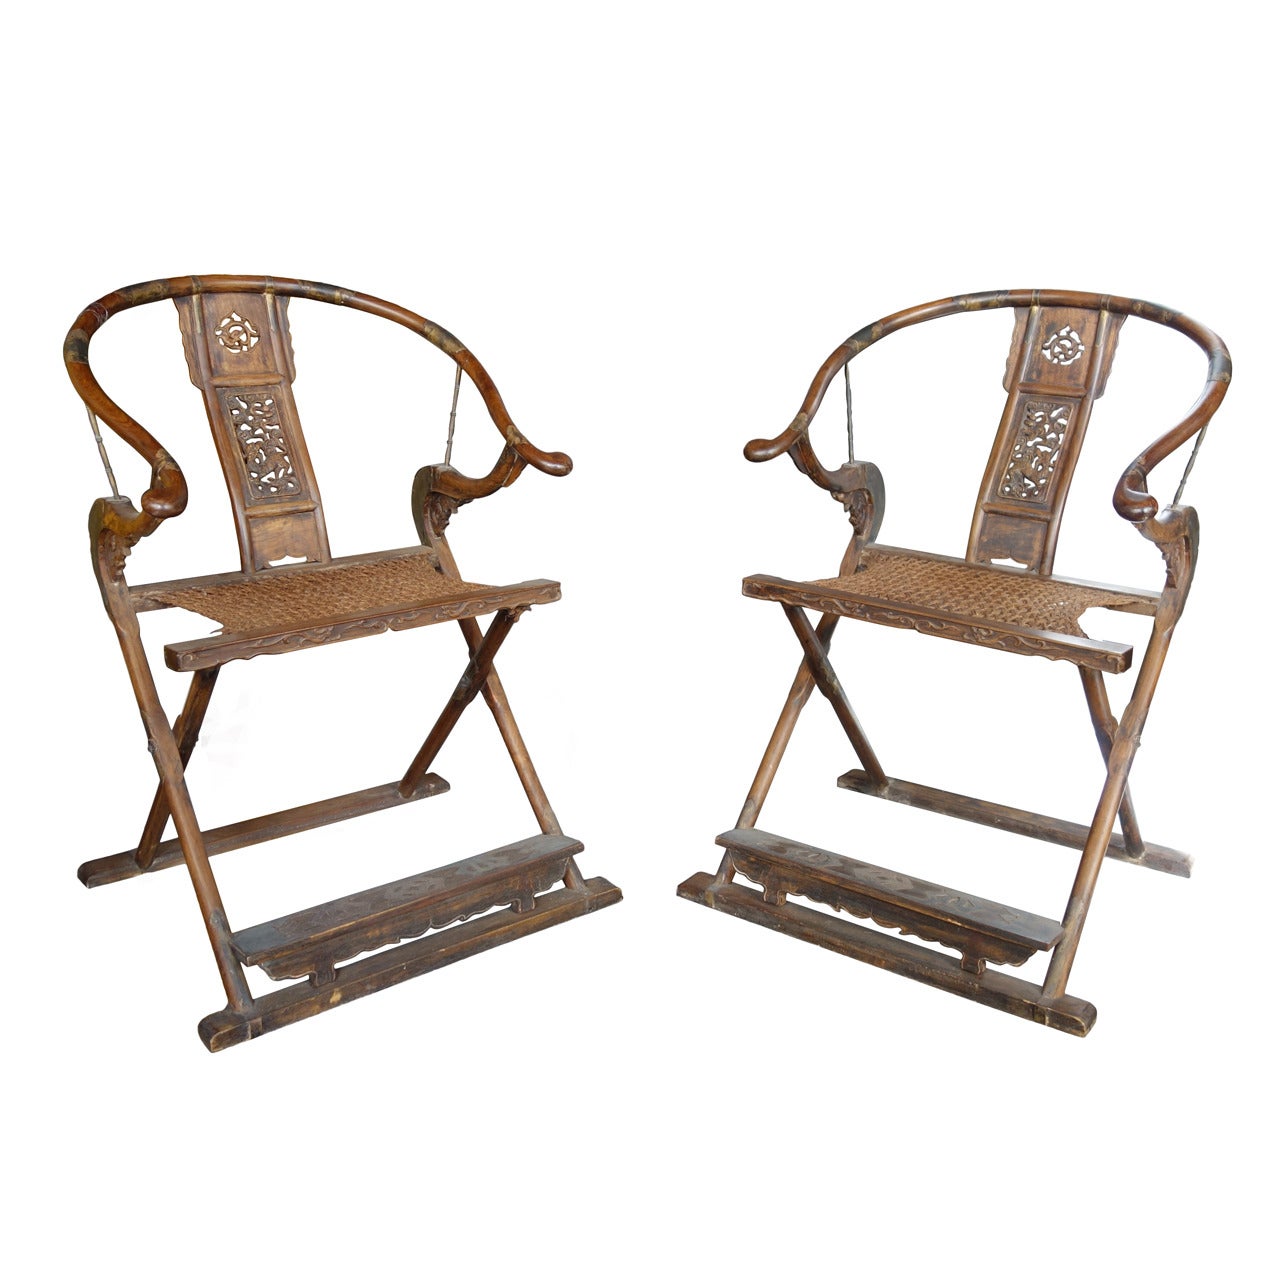 Pair of Chinese Emperor Chairs